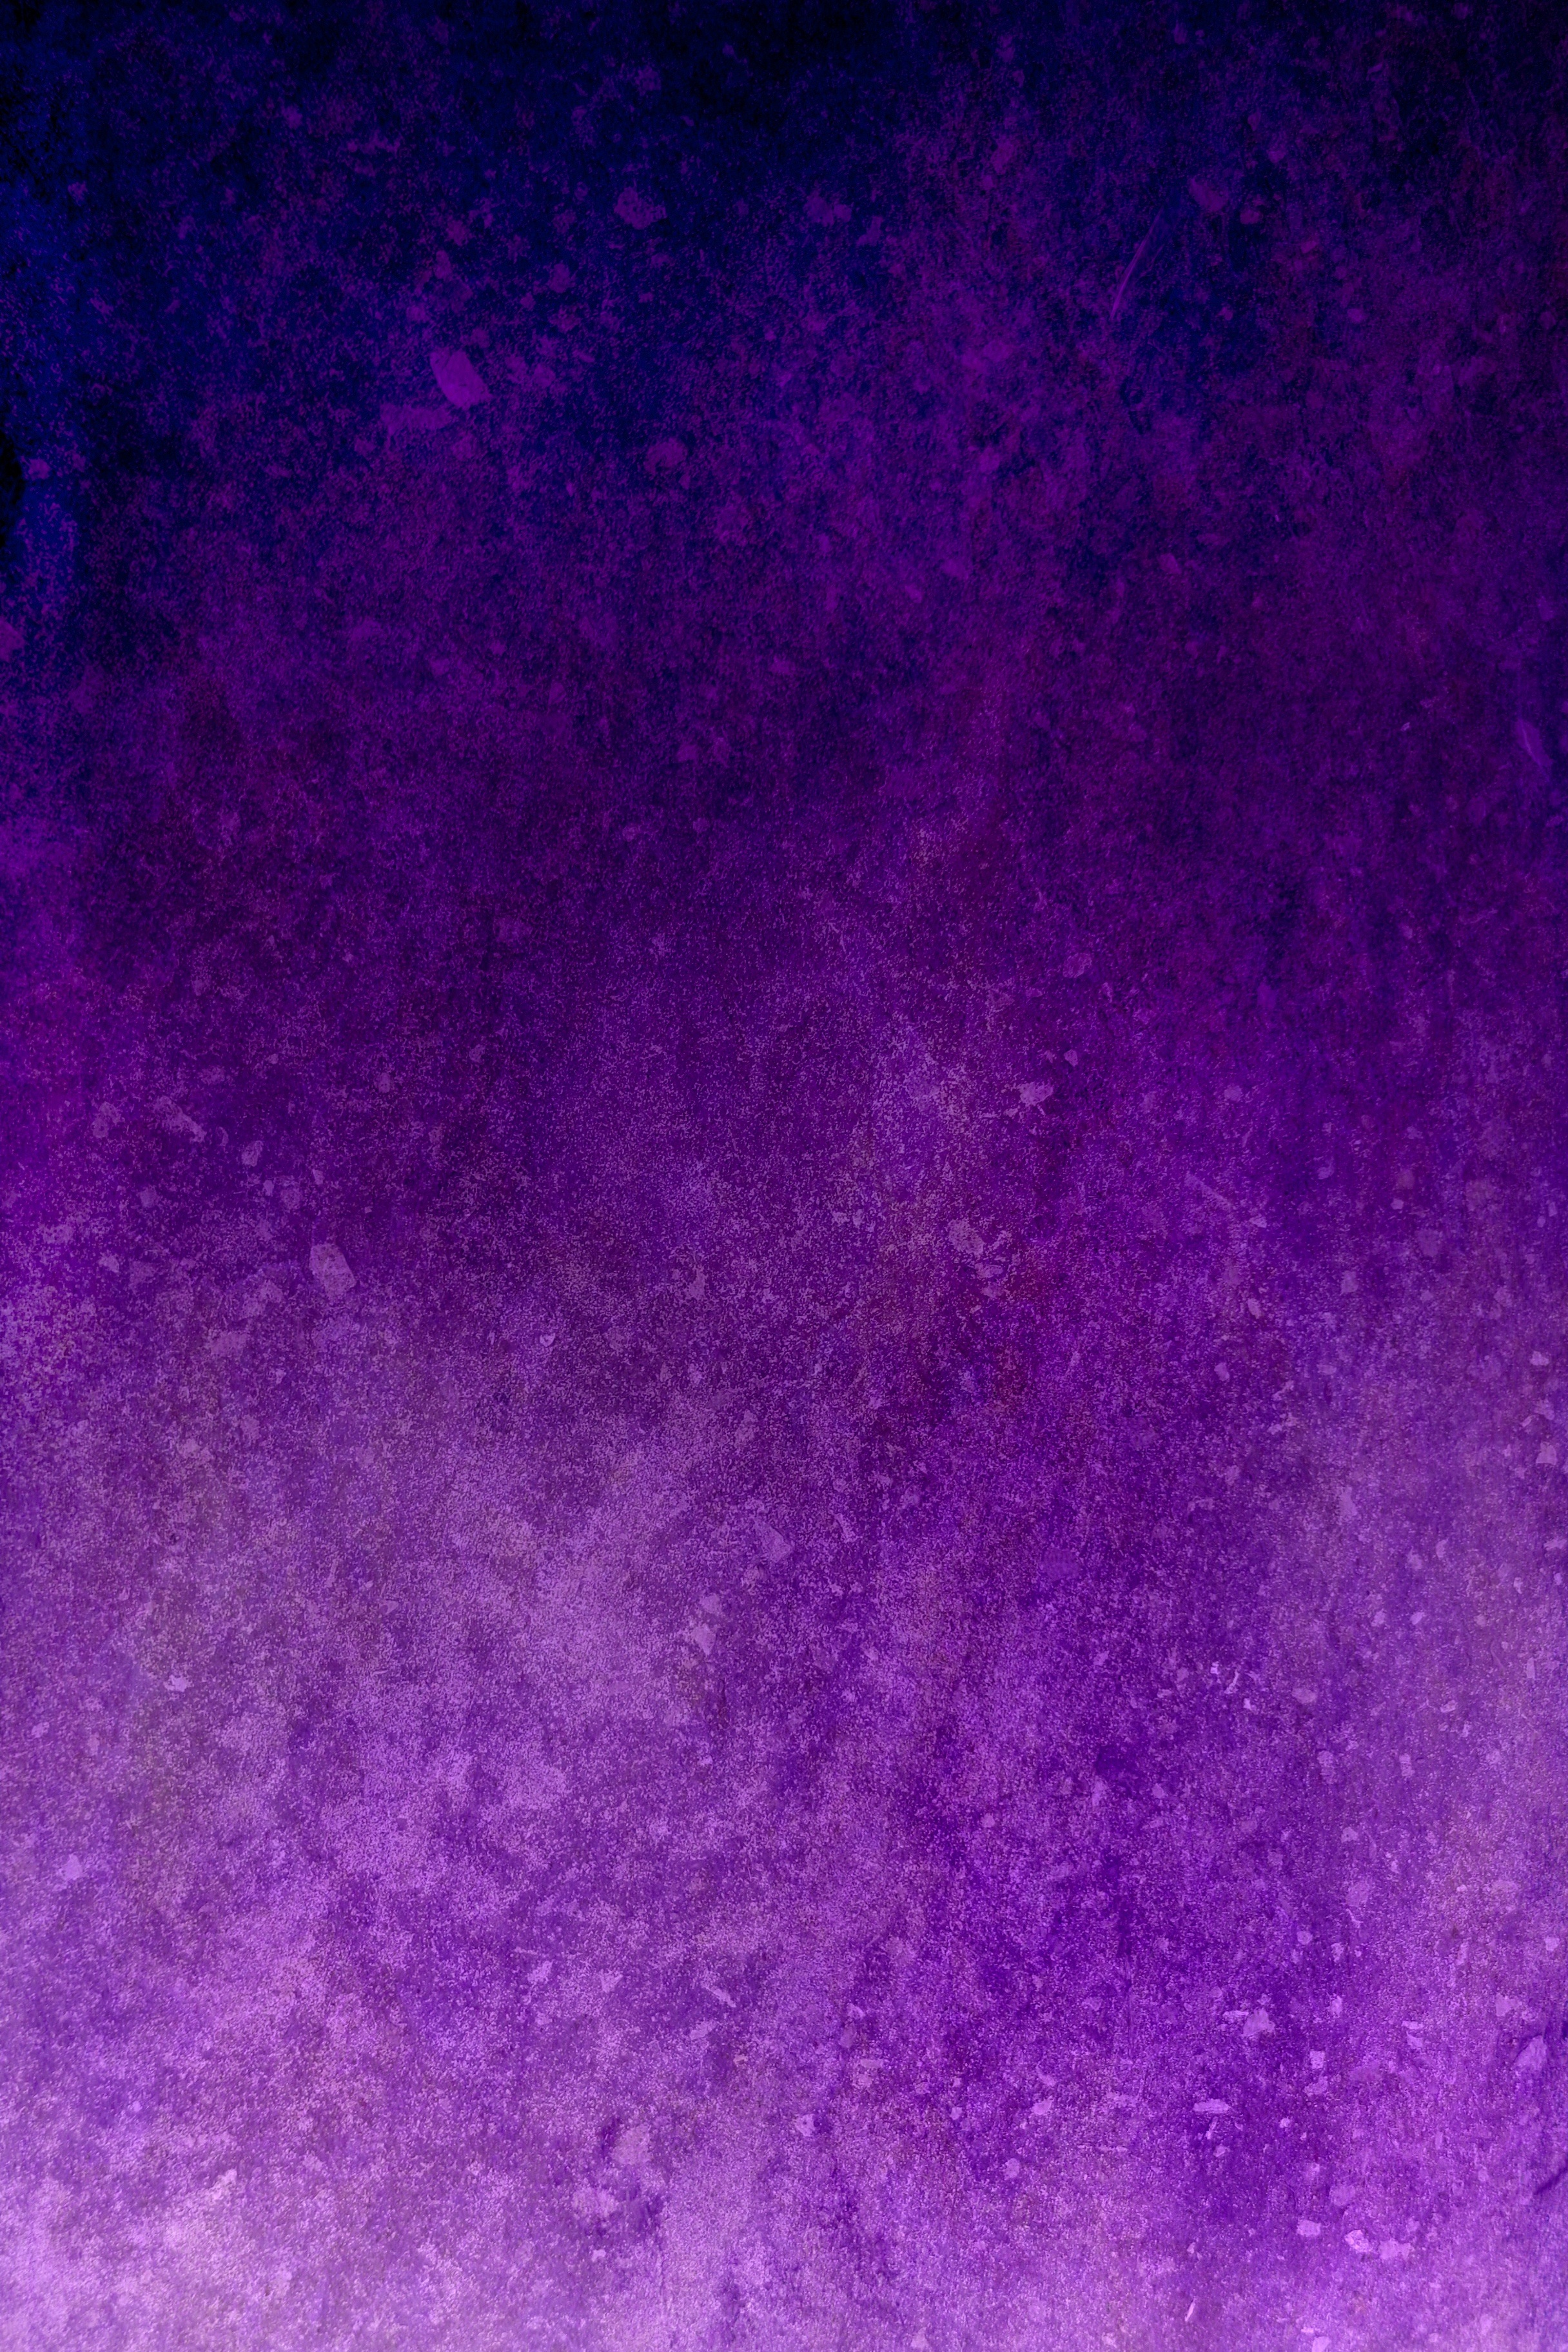 70039 download wallpaper background, texture, textures, violet, stains, spots, purple, shade, tint screensavers and pictures for free